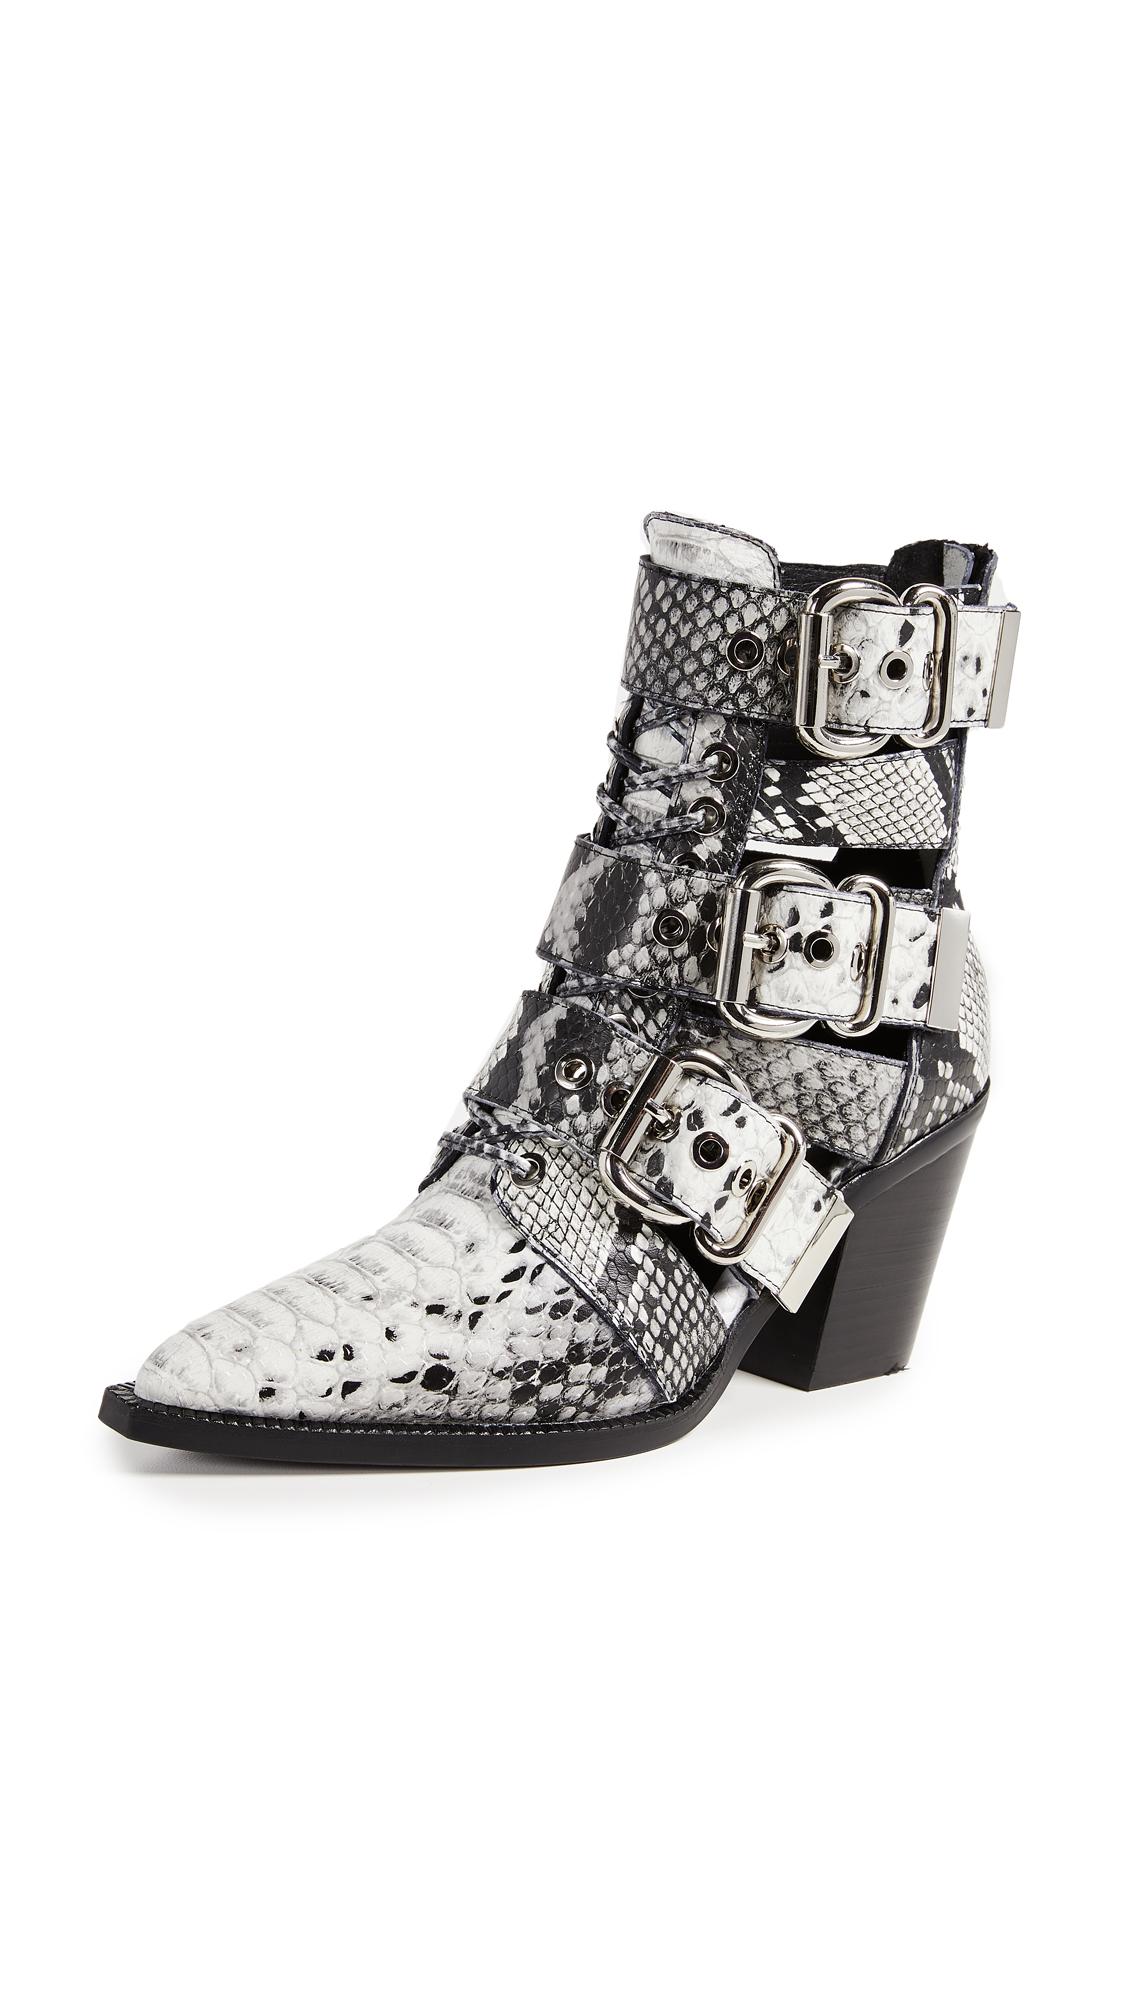 Jeffrey Campbell Caceres Buckle Booties In Black/white Snake | ModeSens